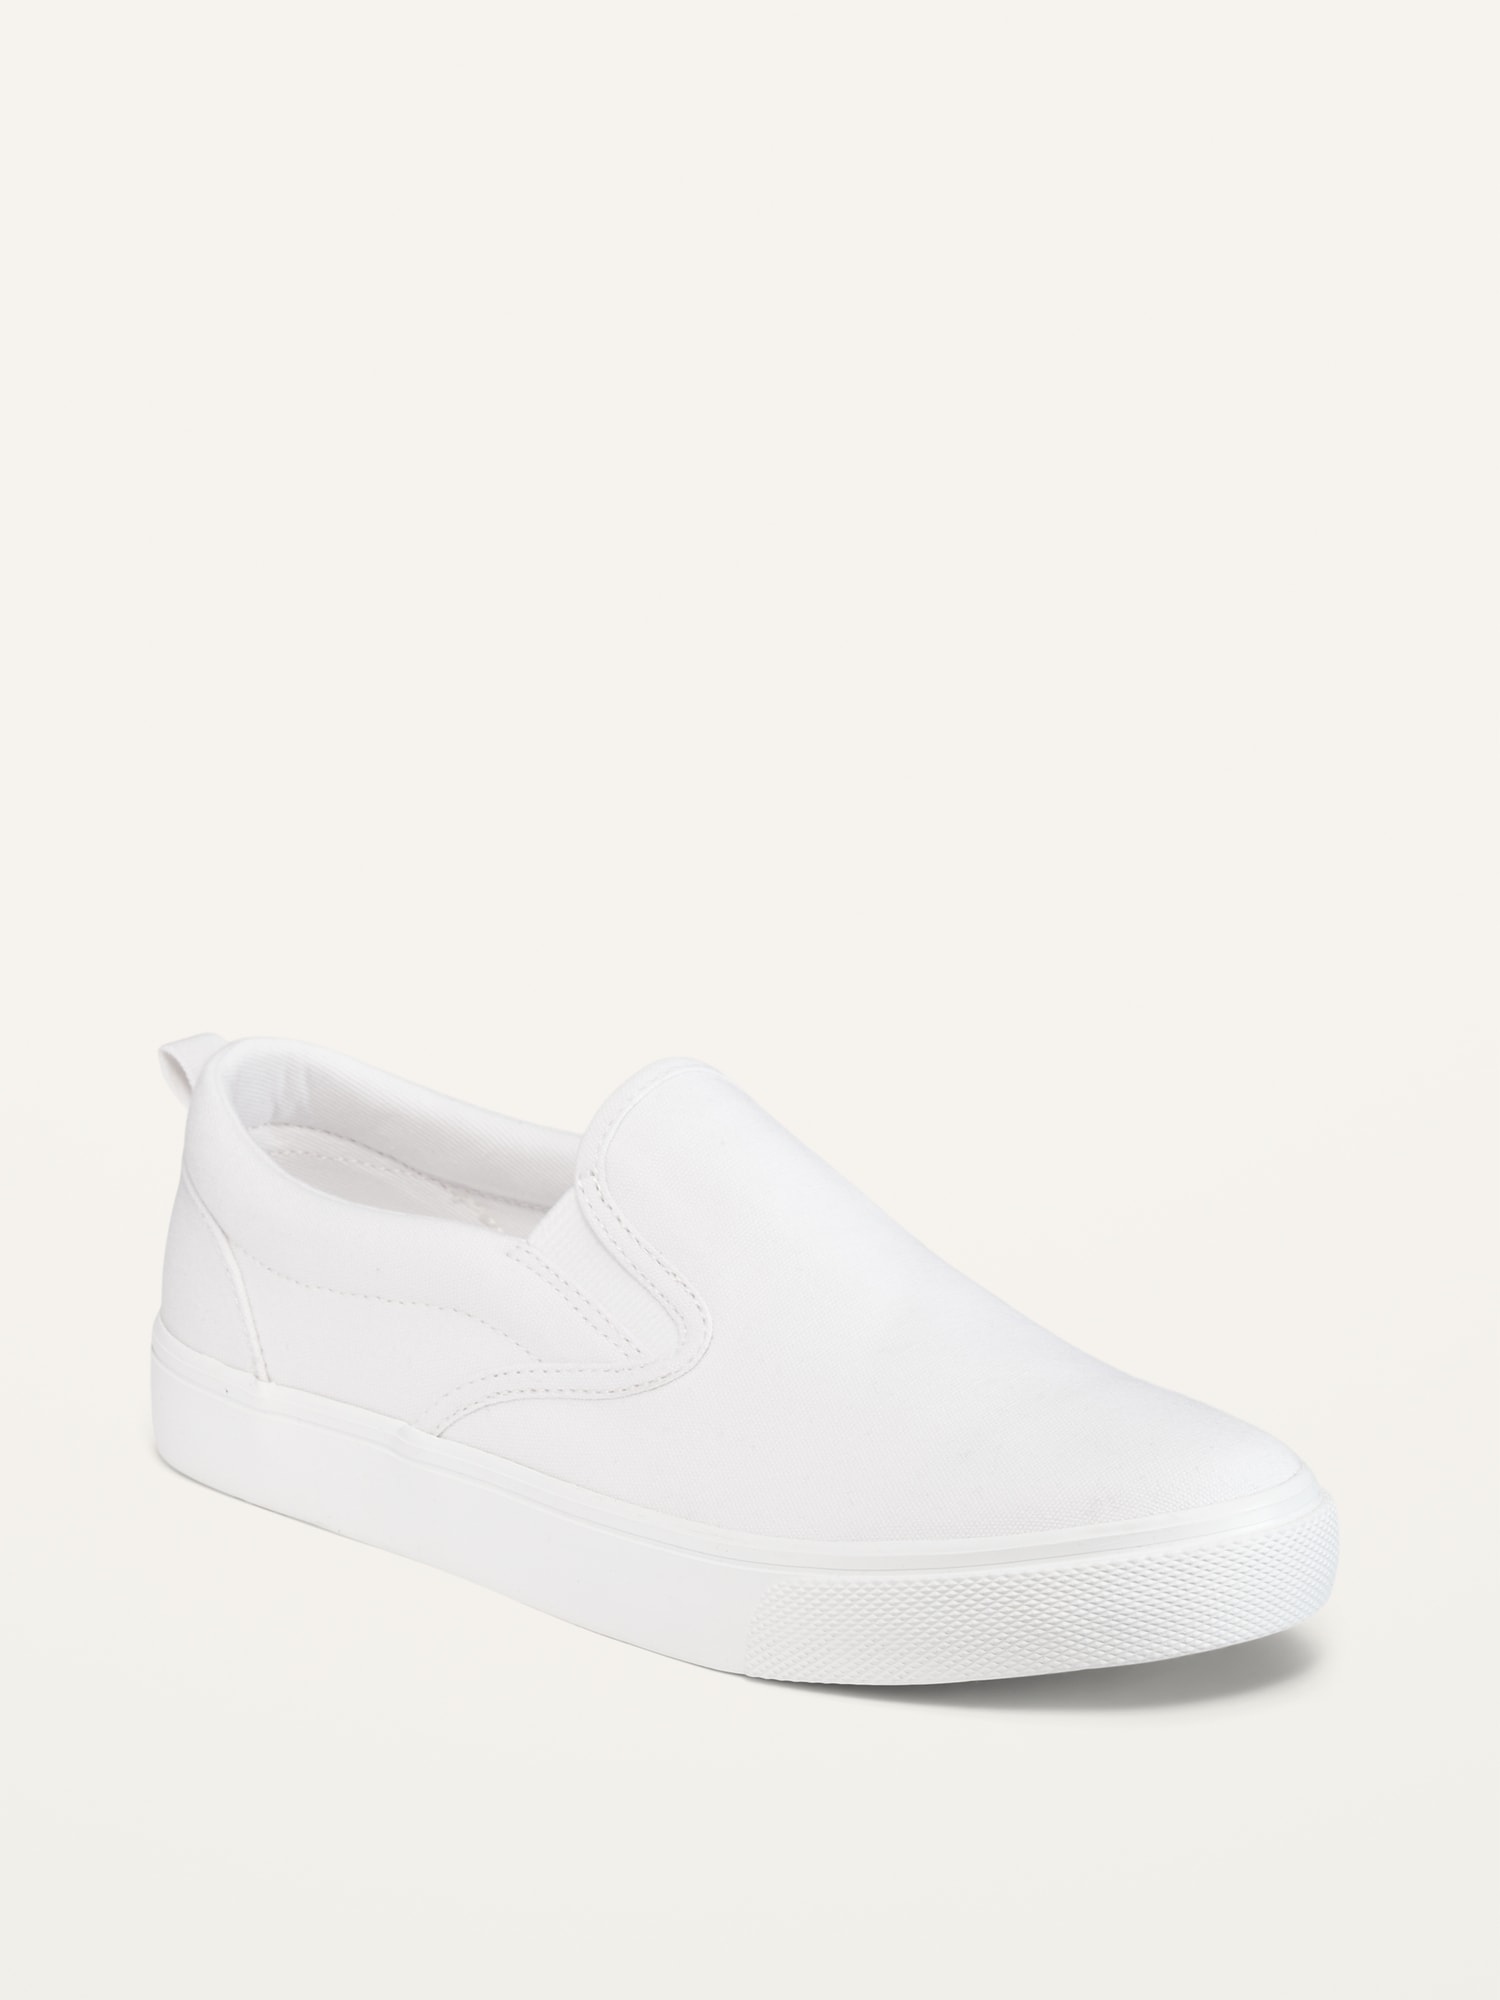 Canvas Slip-Ons For Boys | Old Navy